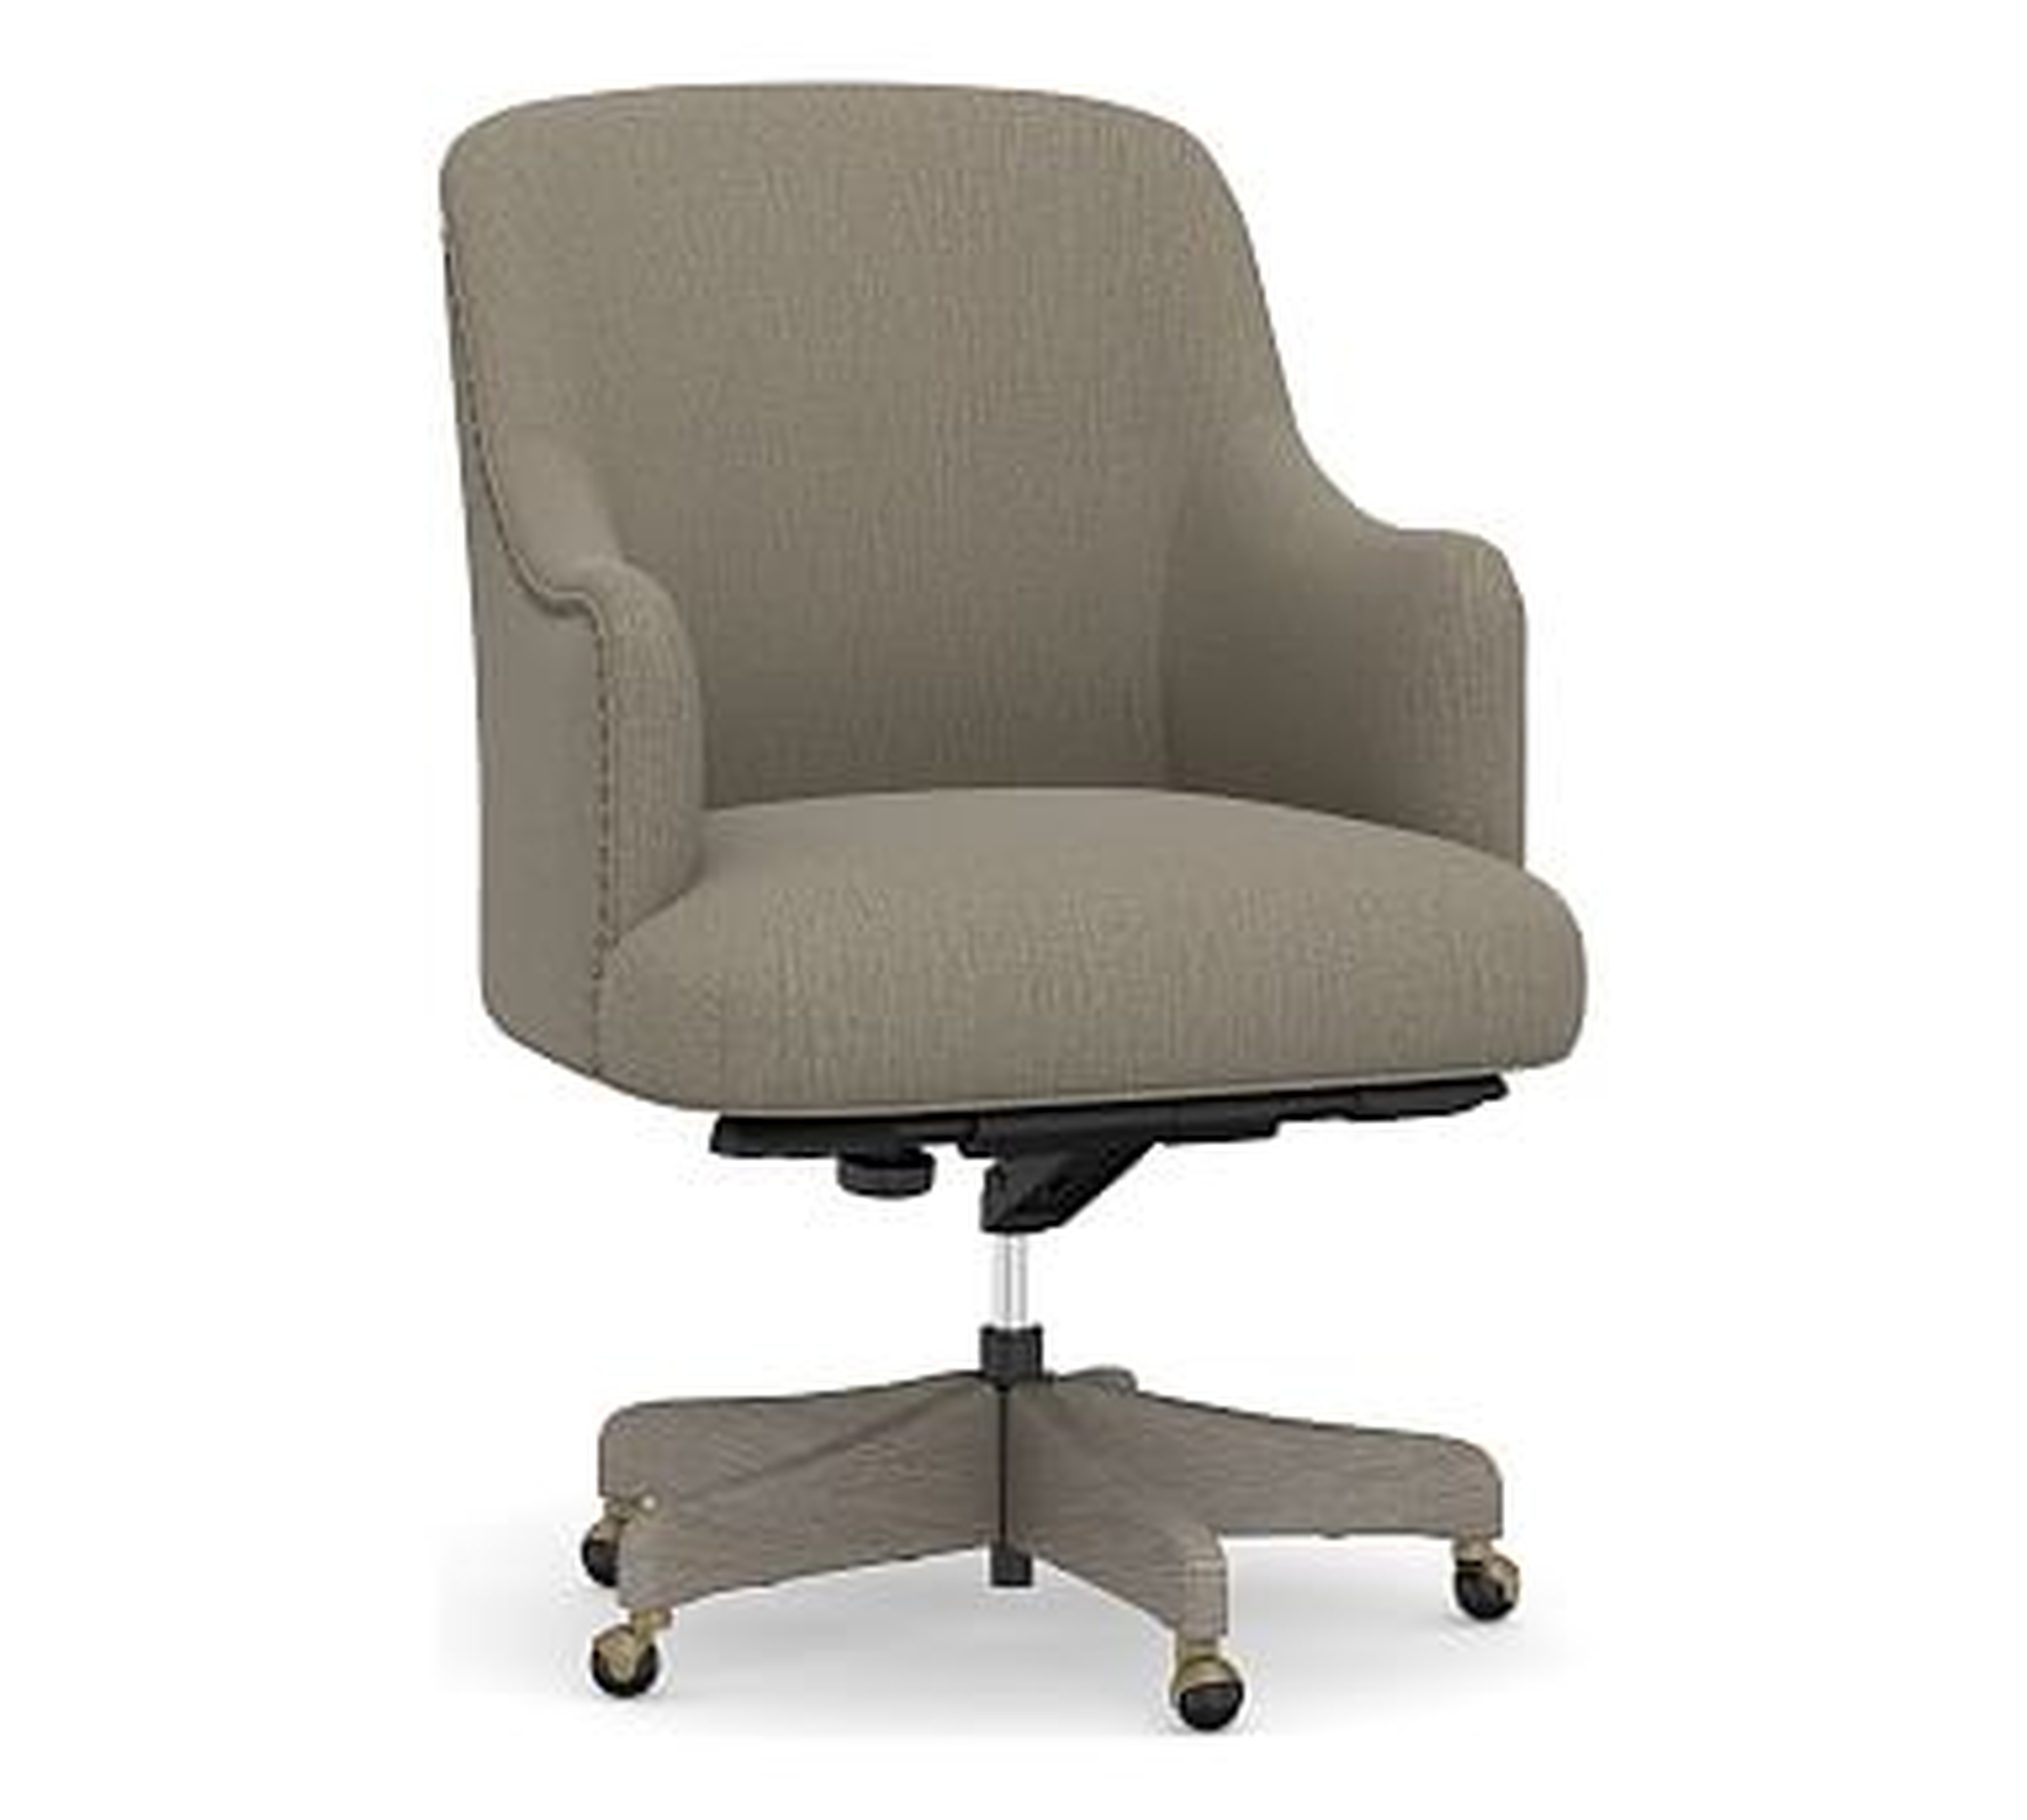 Reeves Upholstered Swivel Desk Chair, Gray Wash Frame, Chenille Basketweave Taupe - Pottery Barn